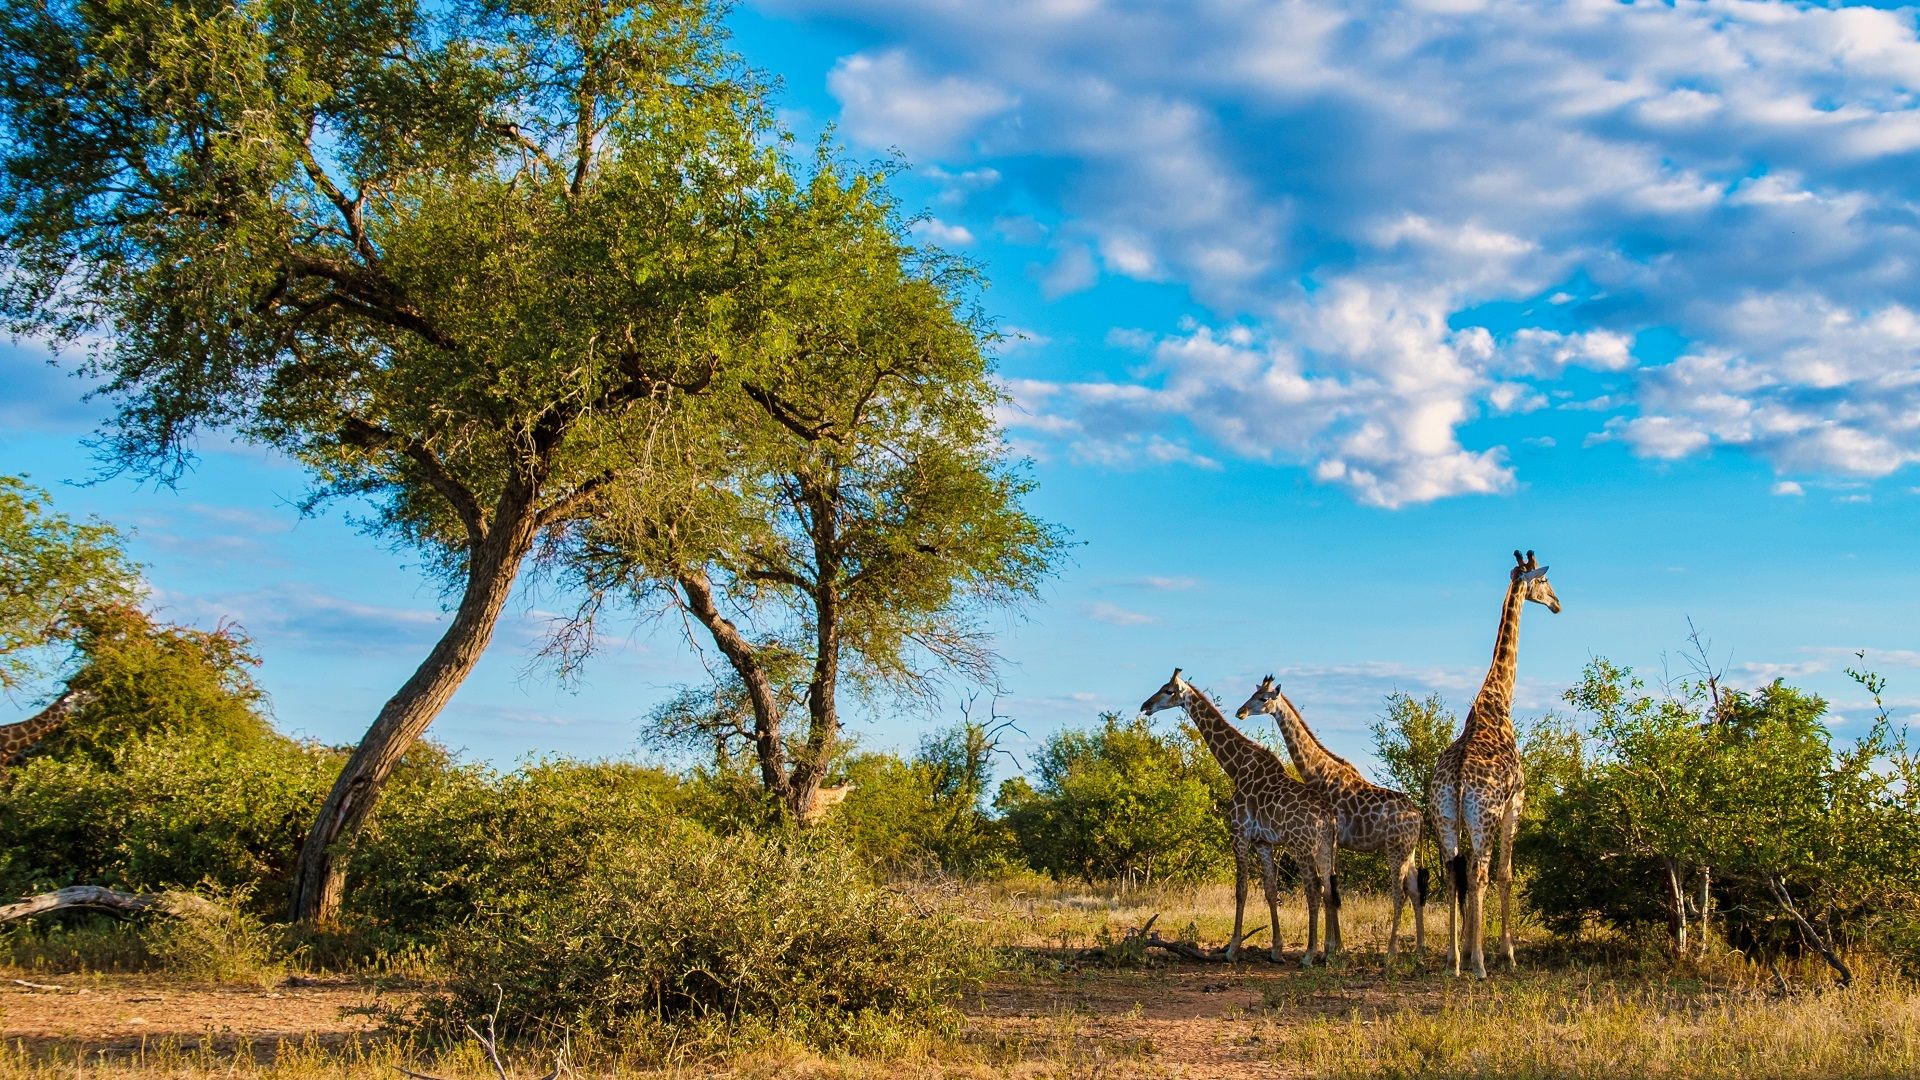 African safari: 8 best national parks to view wildlife